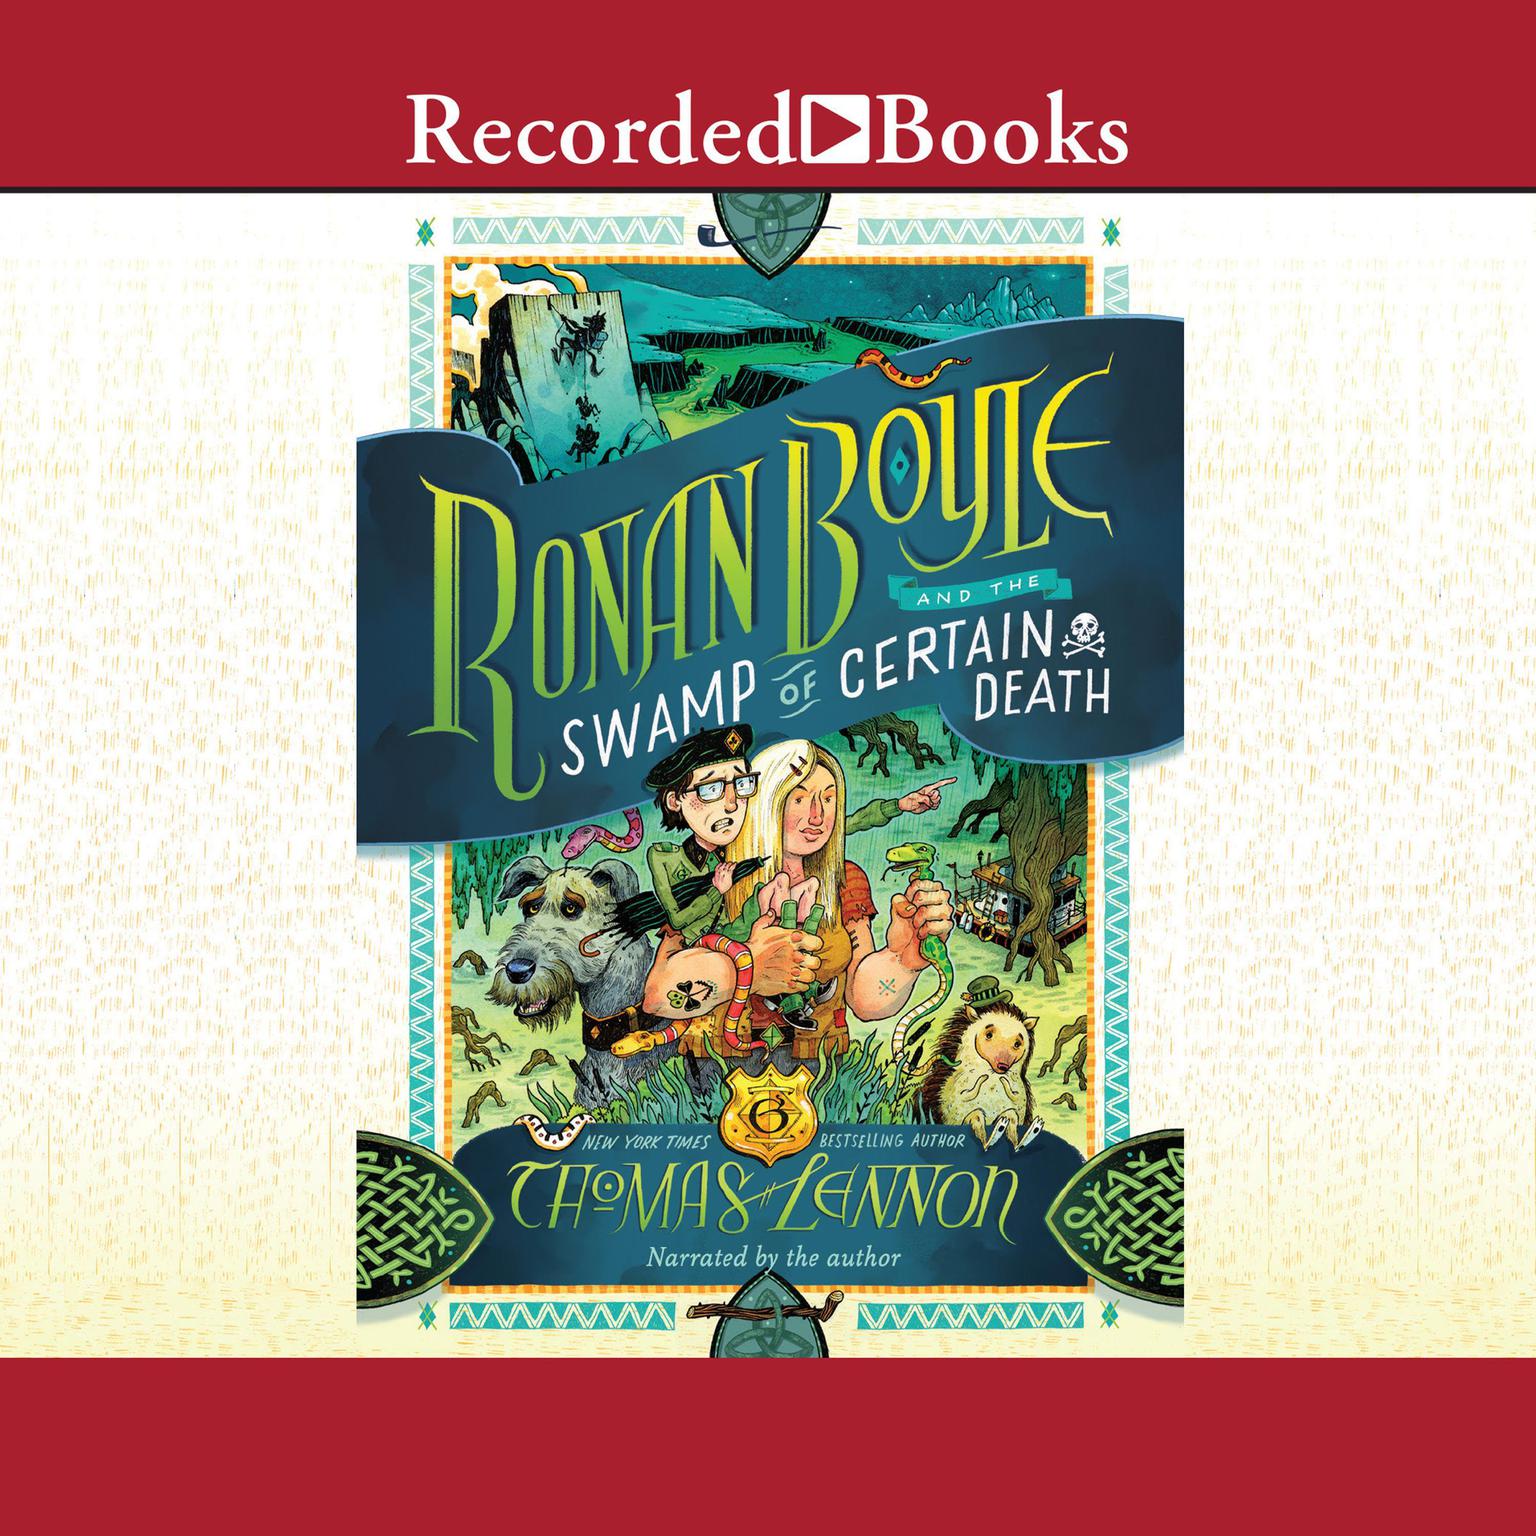 Ronan Boyle and the Swamp of Certain Death Audiobook, by Thomas Lennon